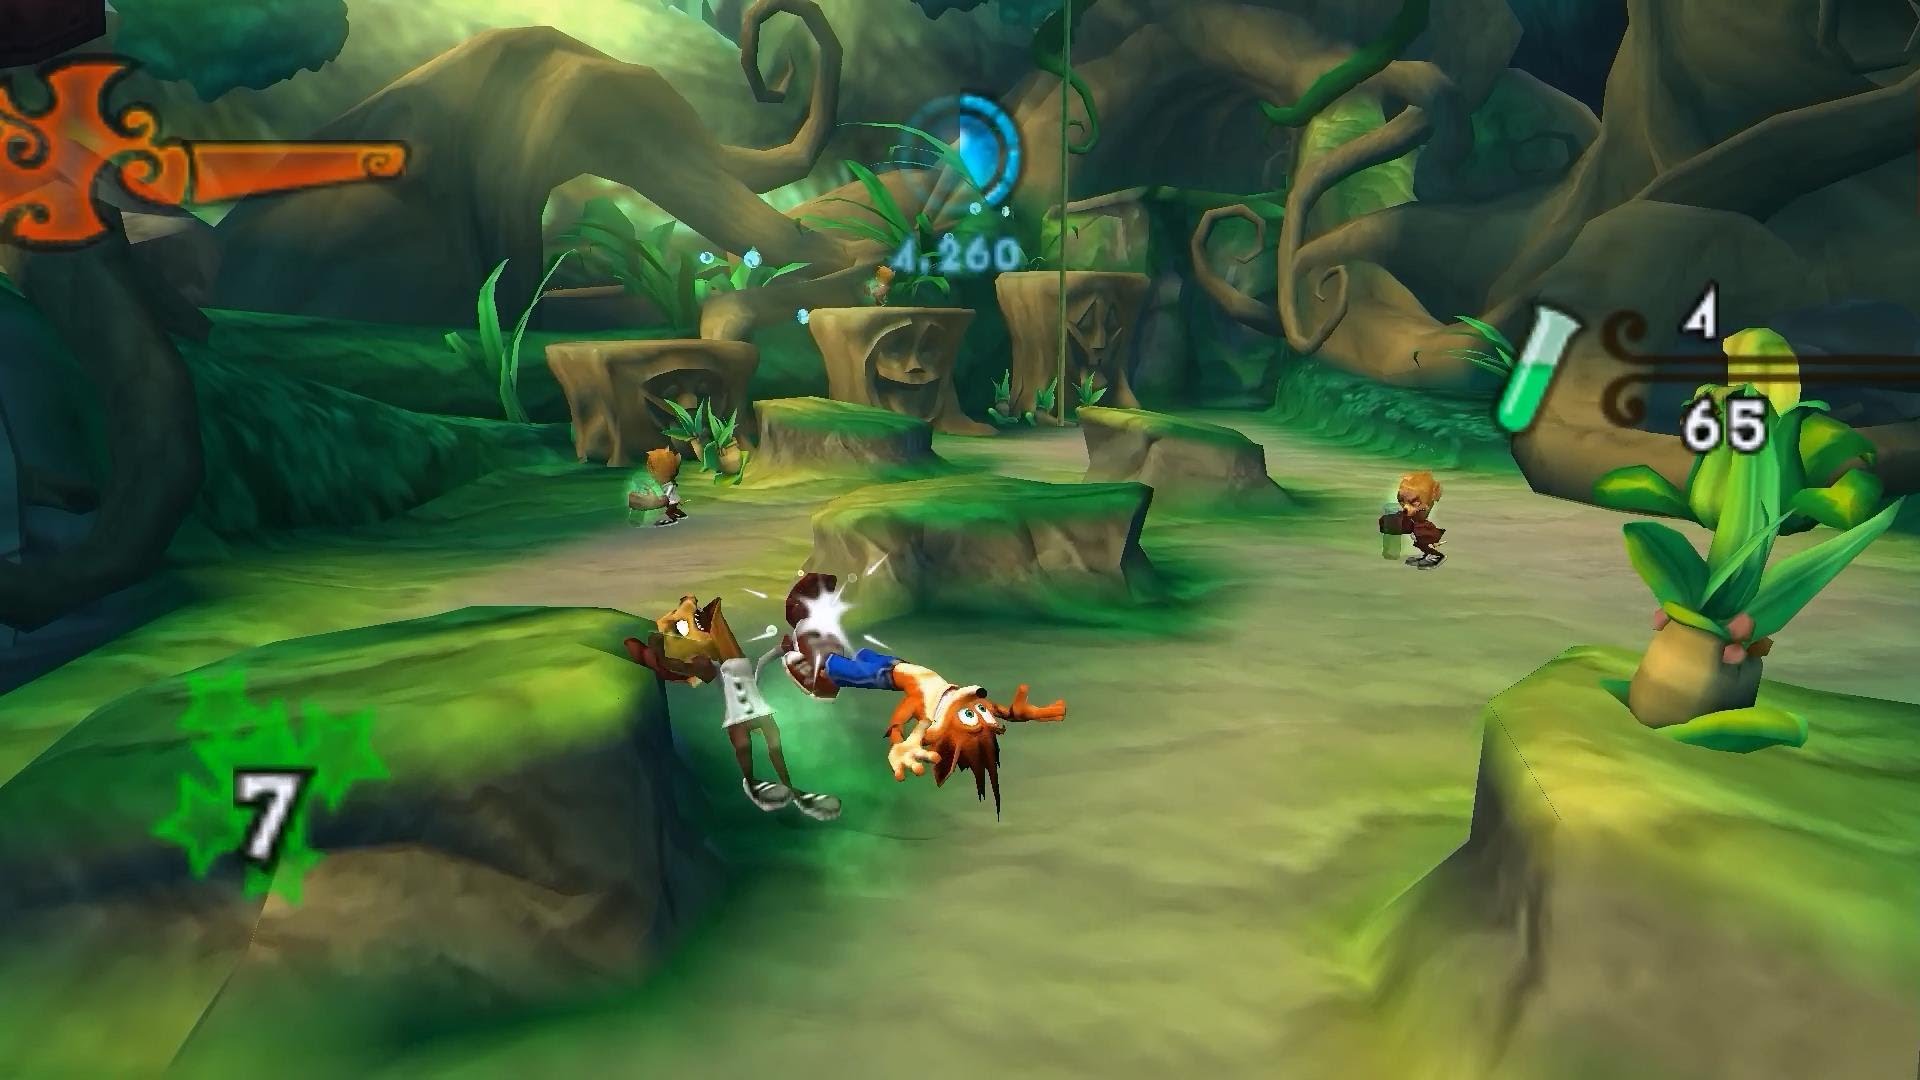 Crash of the Titans Review – Clever Game Pun Reviews